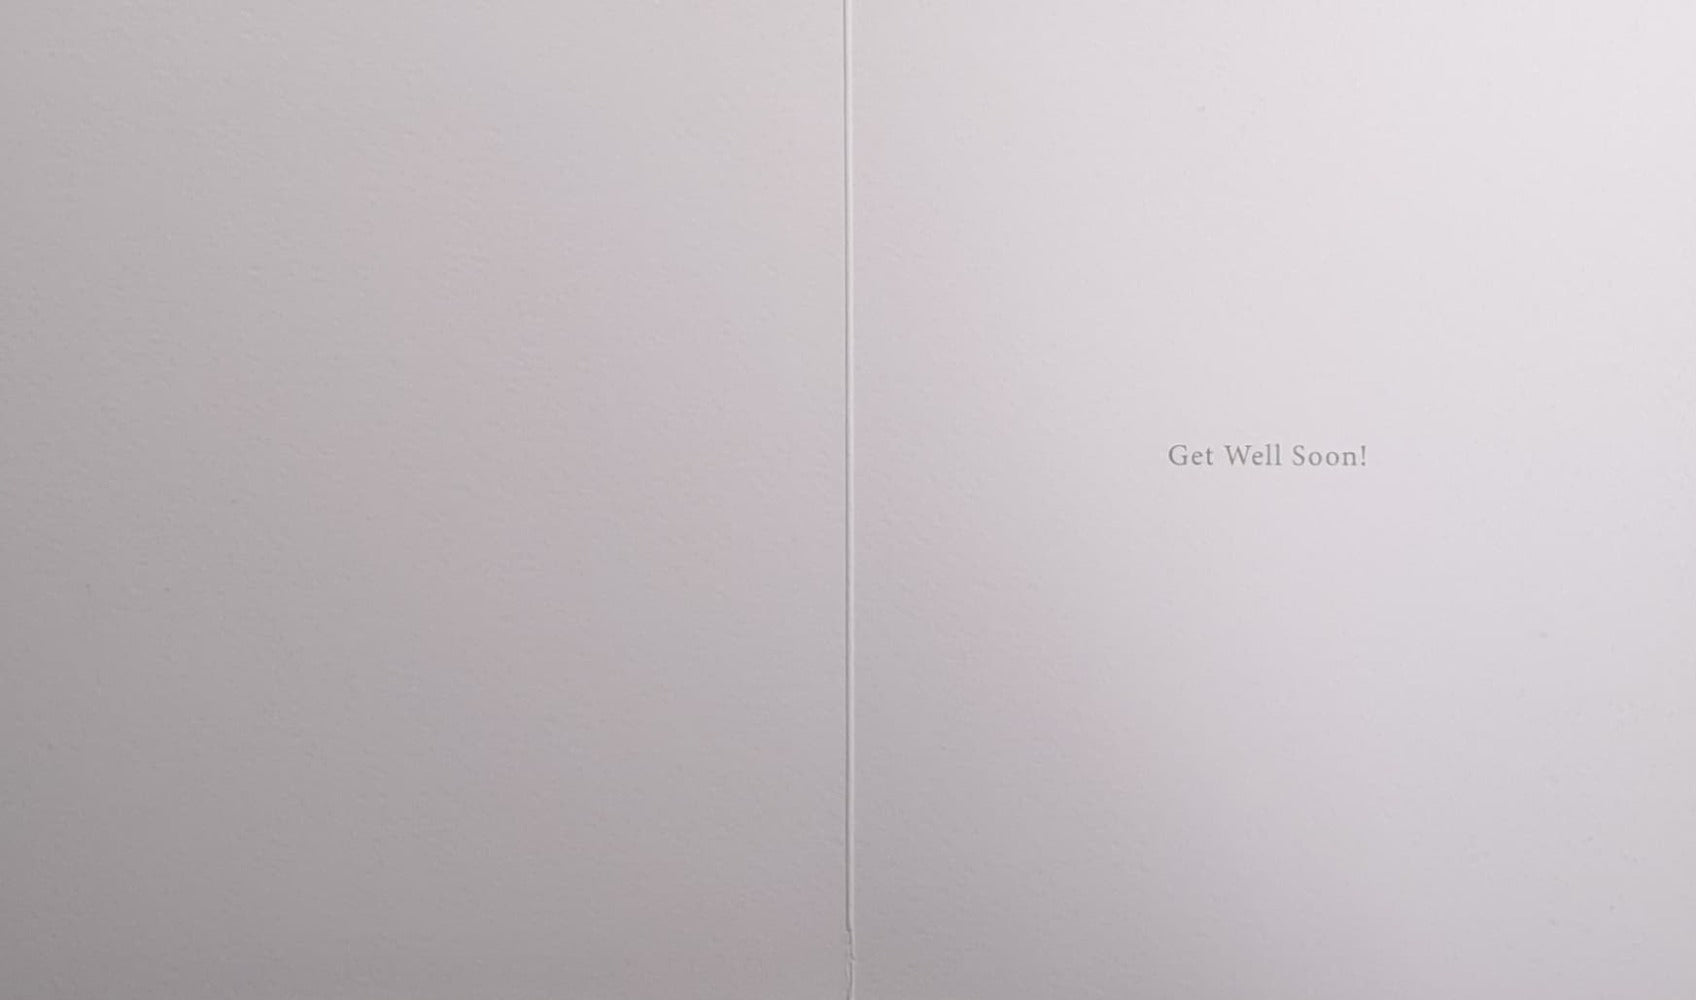 Get Well Card - Speedy Recovery